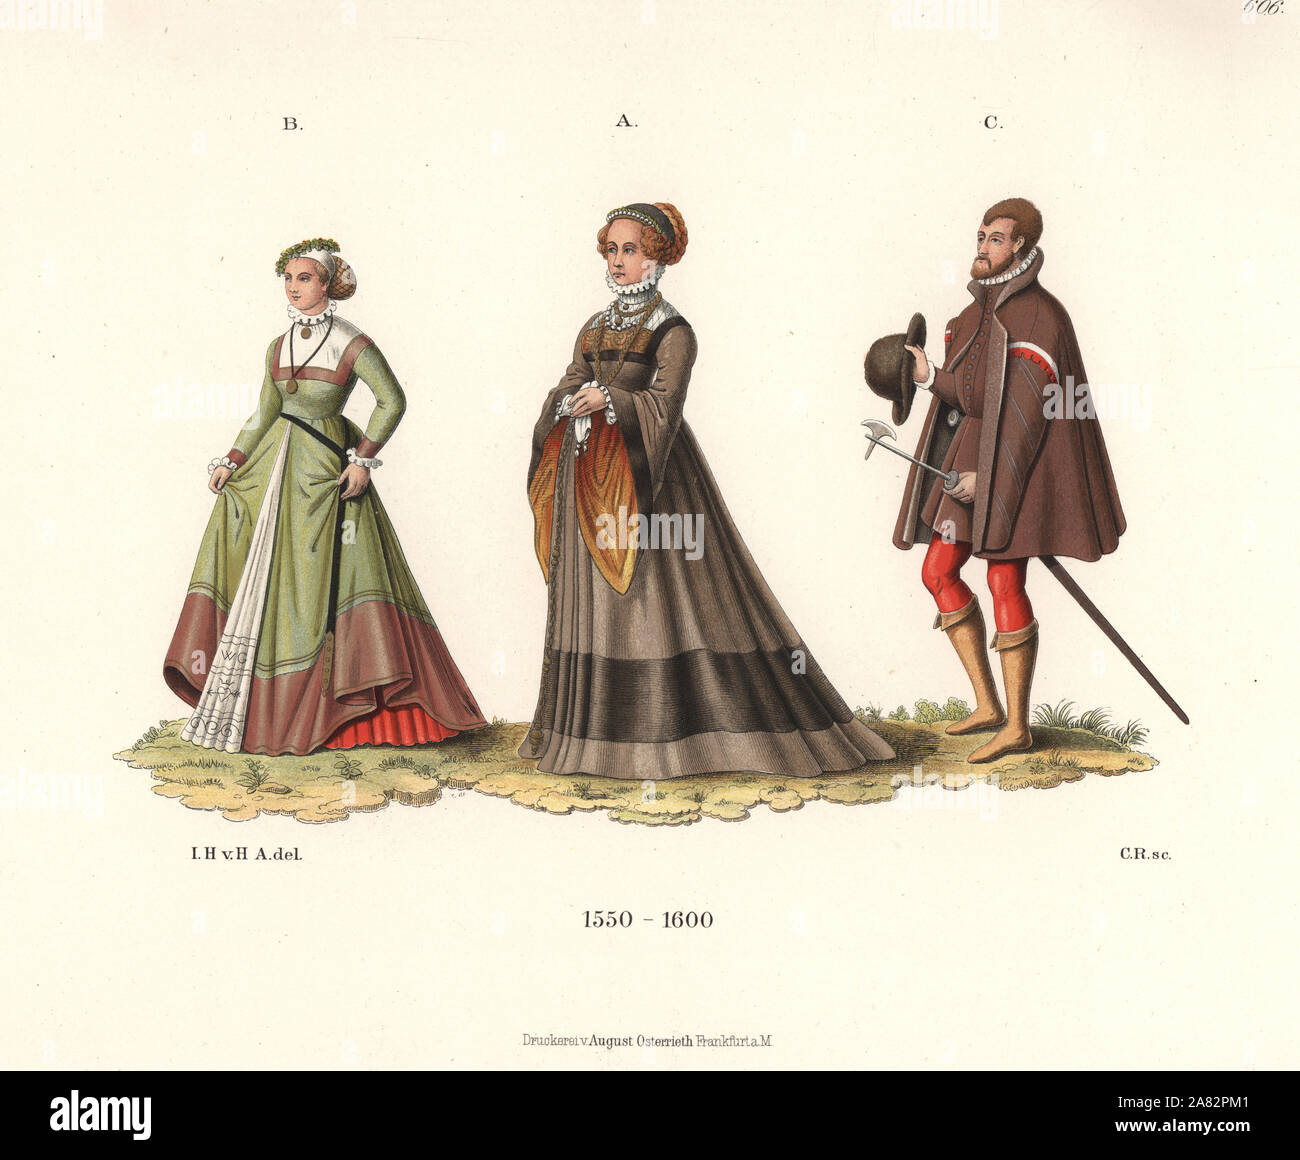 German bride from Augsburg, a maiden from Marburg, and a Stadtknecht with his symbol of office, a small axe. Chromolithograph from Hefner-Alteneck's Costumes, Artworks and Appliances from the Middle Ages to the 17th Century, Frankfurt, 1889. Illustration by Dr. Jakob Heinrich von Hefner-Alteneck, lithographed by C. Regnier. Dr. Hefner-Alteneck (1811-1903) was a German museum curator, archaeologist, art historian, illustrator and etcher. Stock Photo